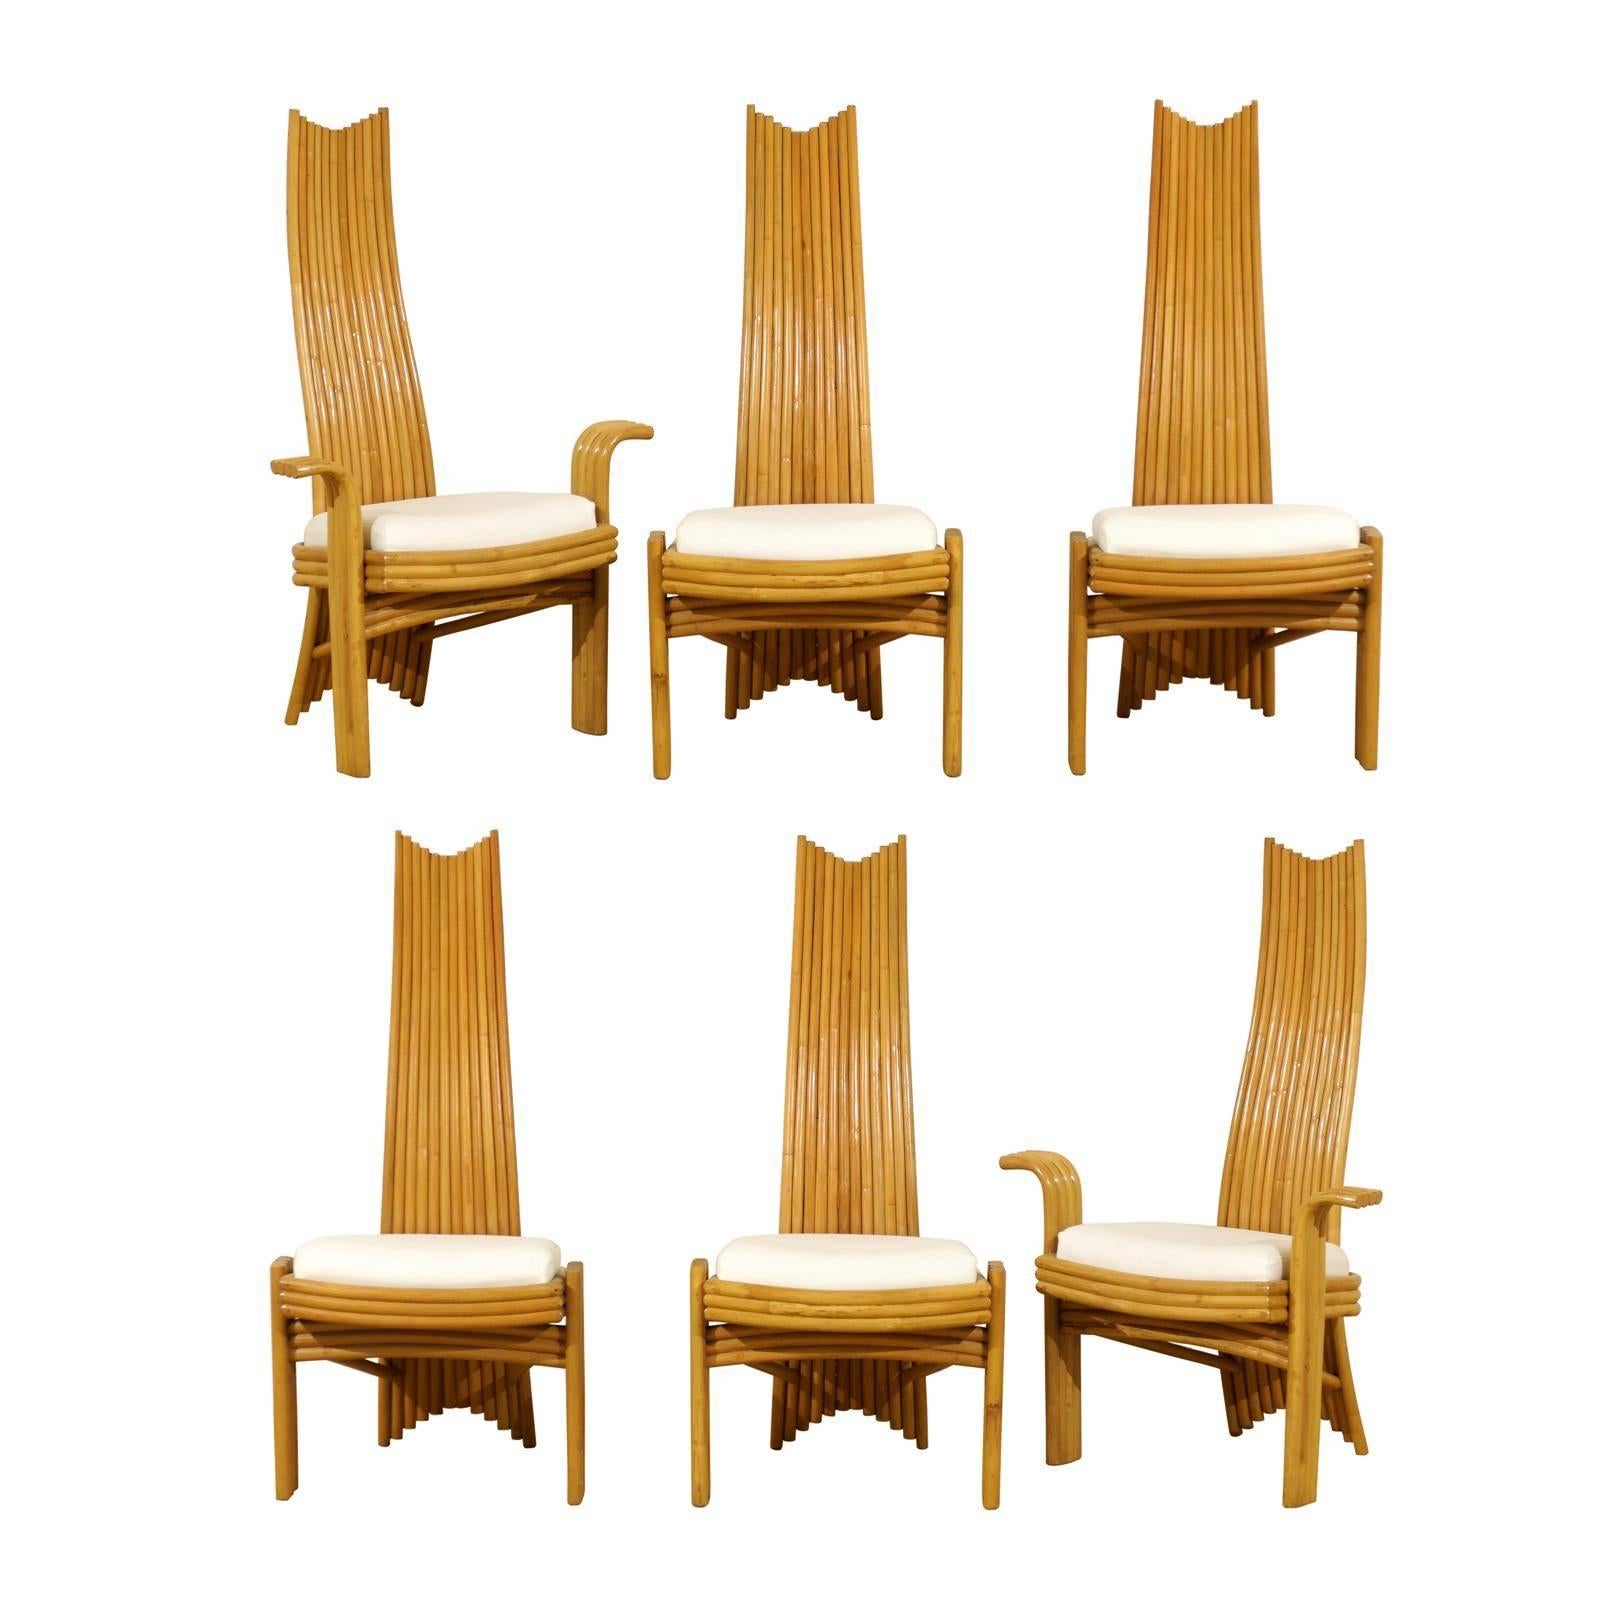 Exquisite Set of Six Modern Rattan Dining Chairs in the Mackintosh Style